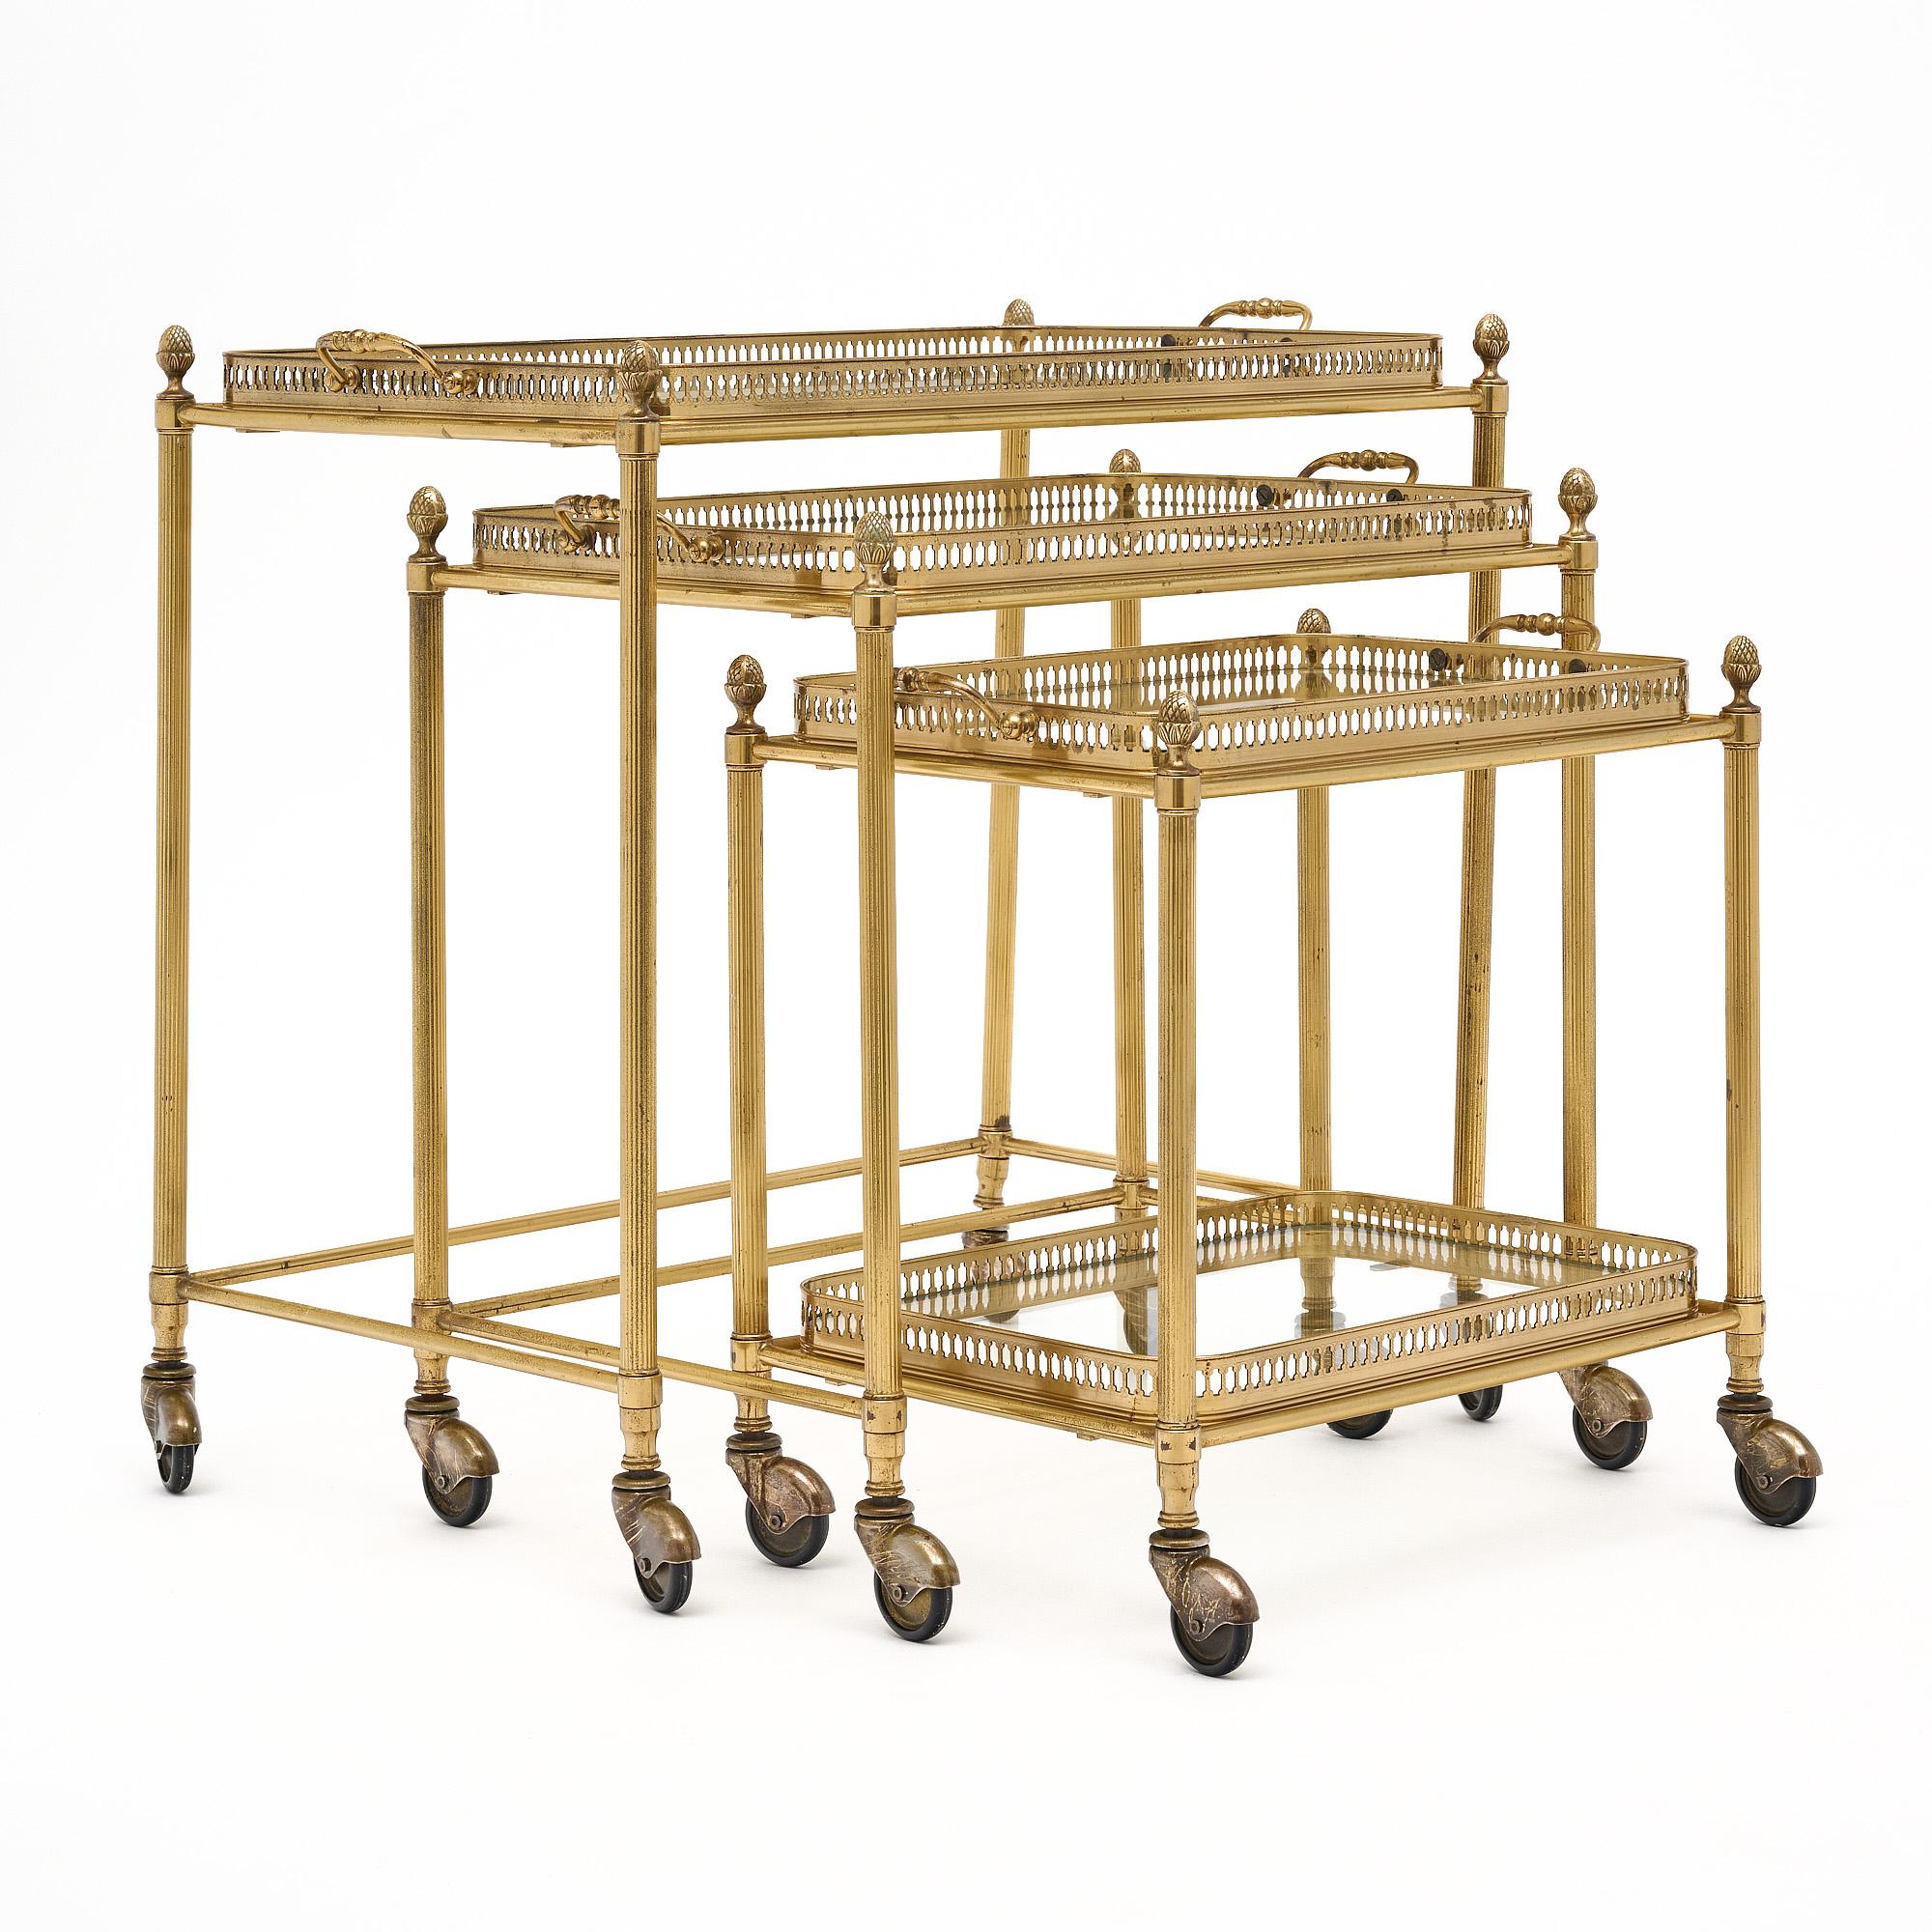 Mid-20th Century French Art Deco Period Nesting Tables For Sale